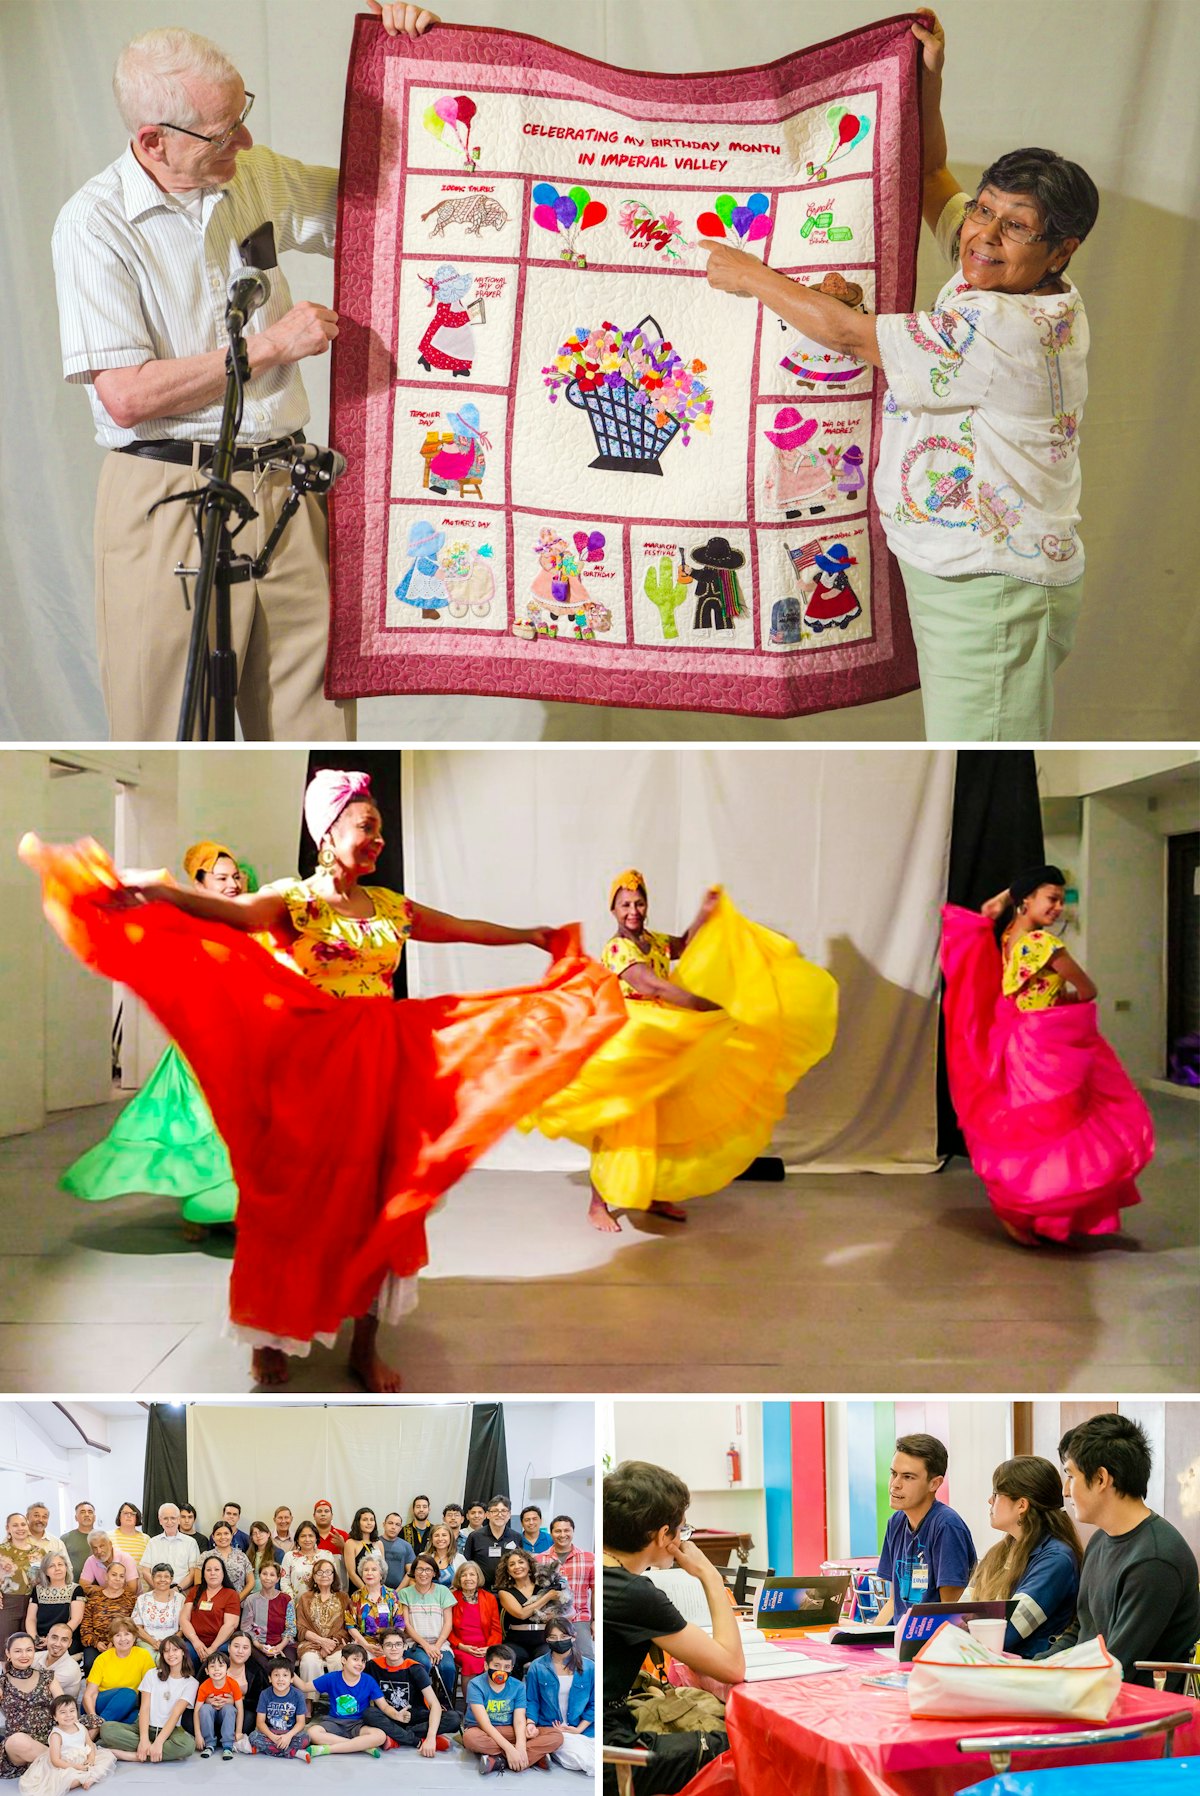 Pictured here is a conference in Mexicali, Mexico, featuring traditional dance, artistic presentations, and thoughtful discussions about social betterment. Participants had the opportunity to gather in small groups and explore questions such as, “How can consultation as the basis of decision-making contribute to spiritual and material progress?”